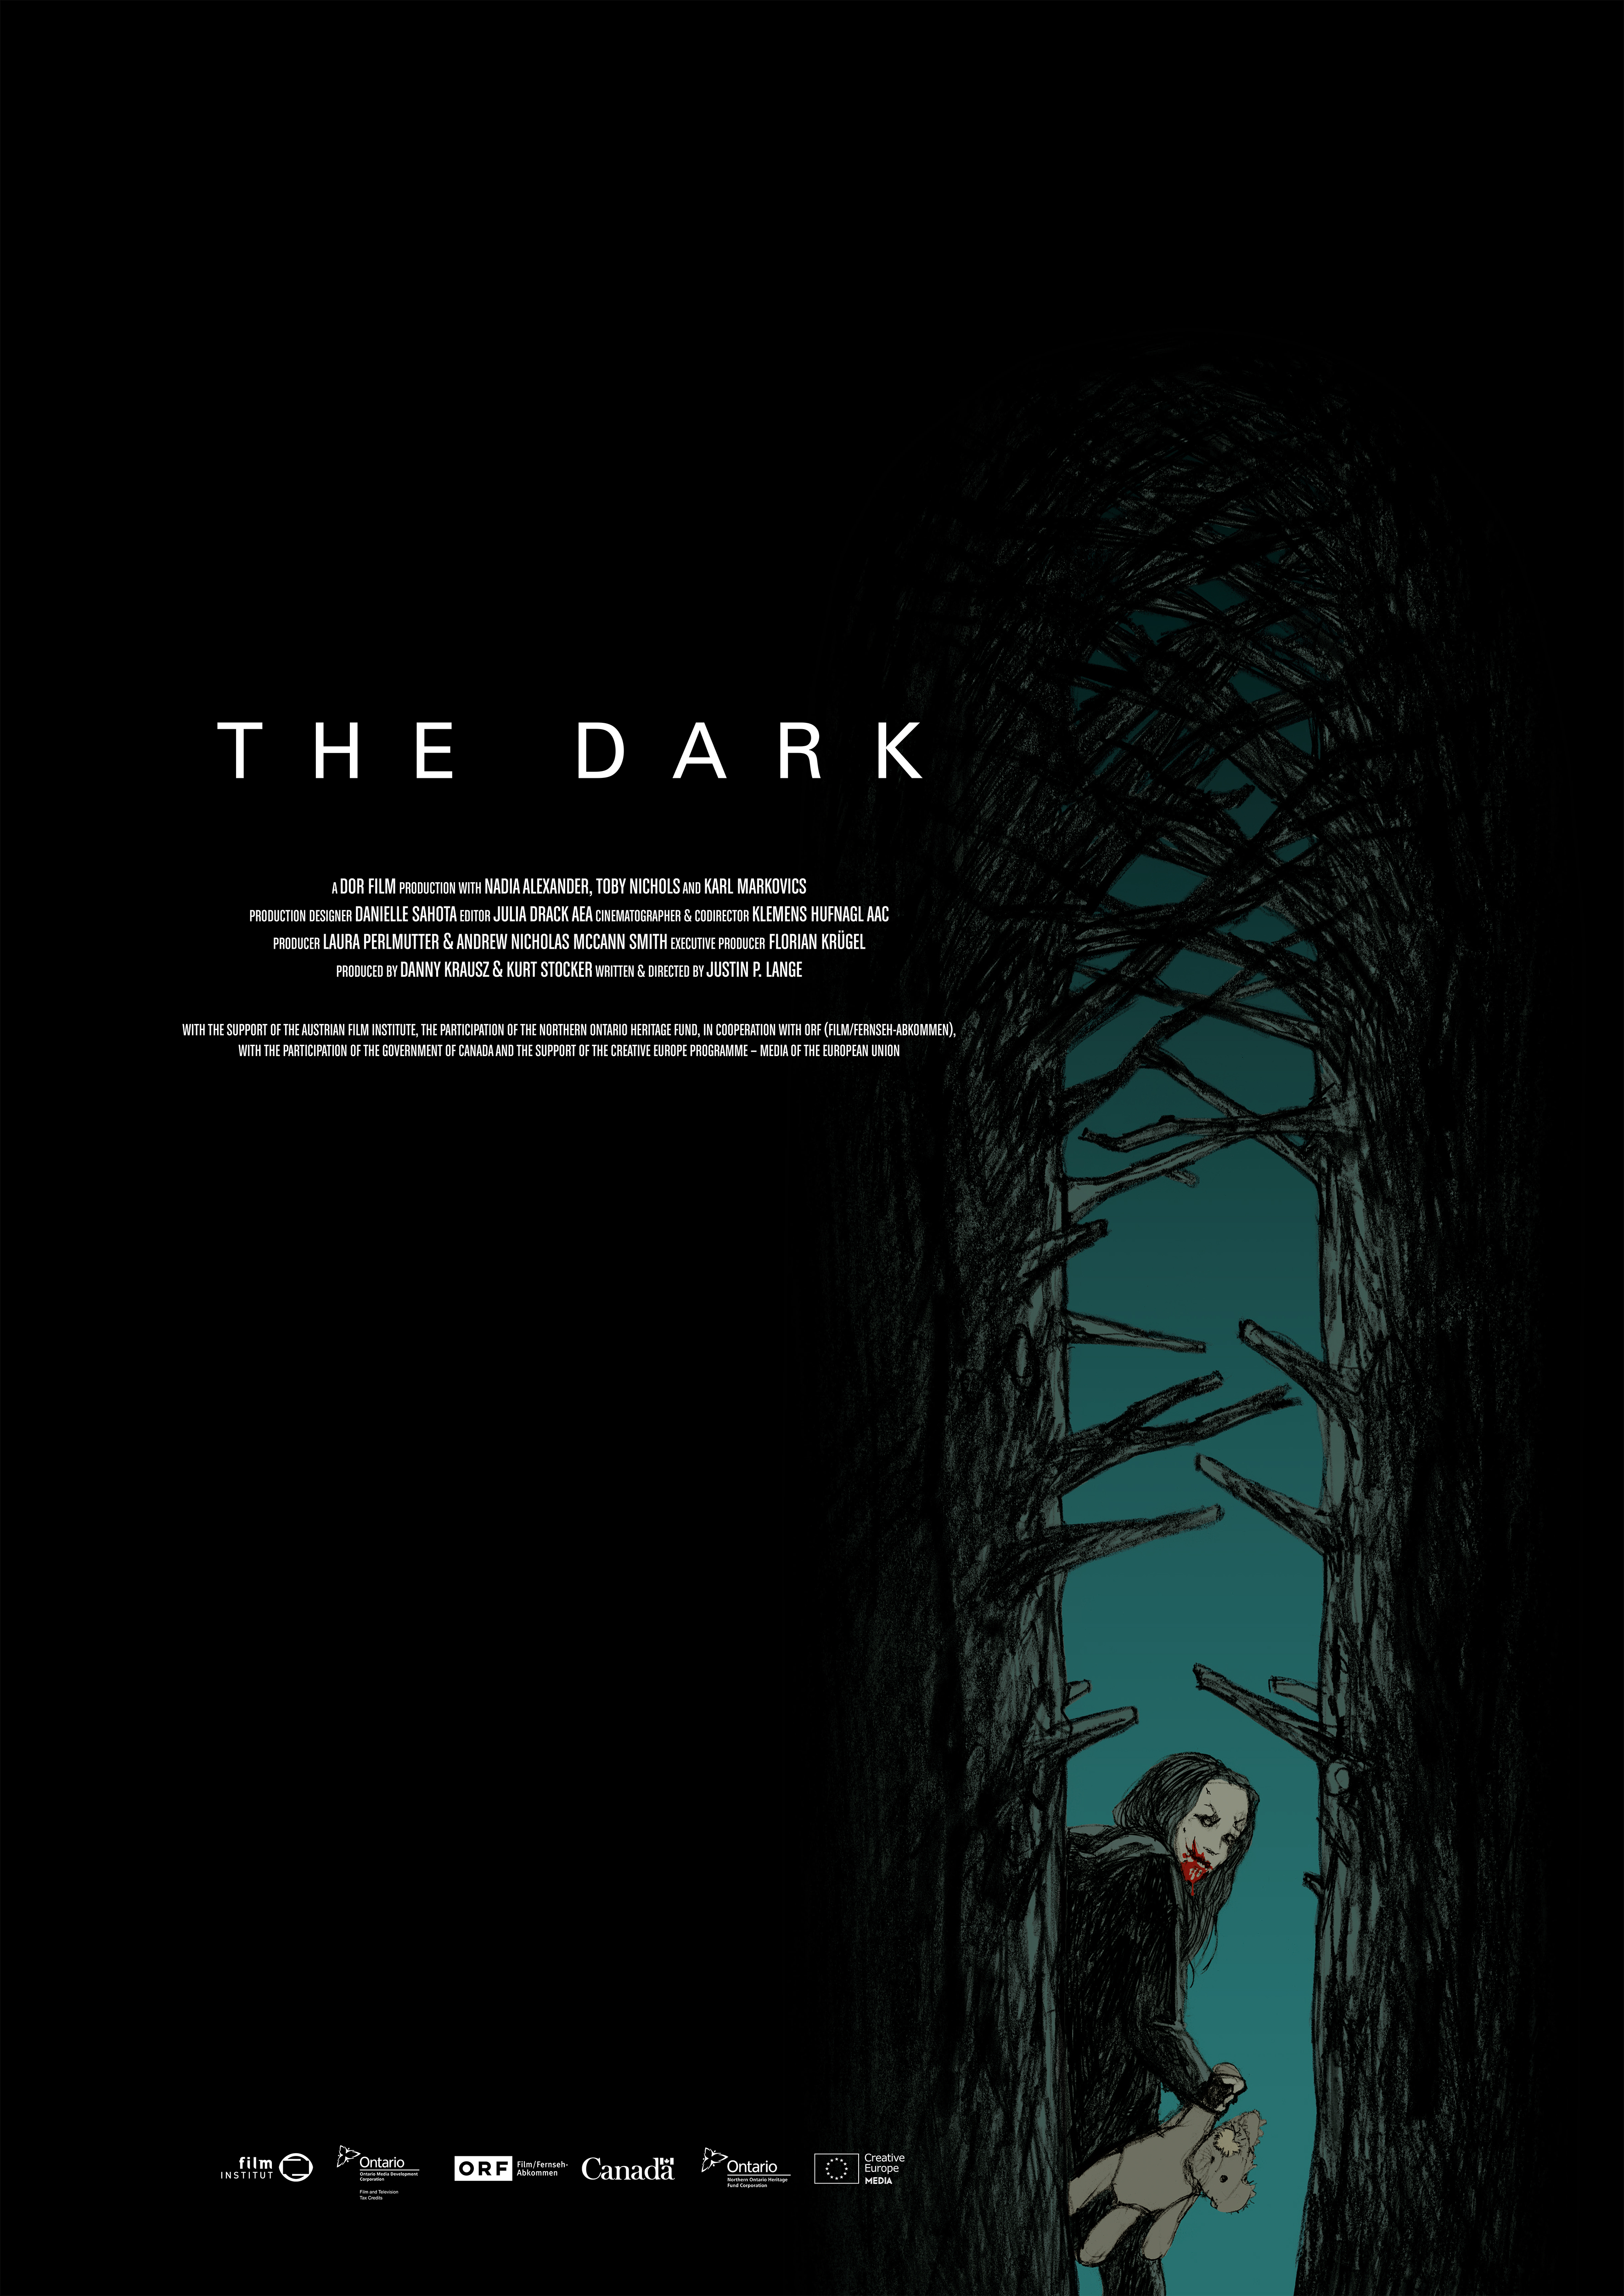 The Dark film review: Justin P Lange’s dark debut concerns monsters and scars